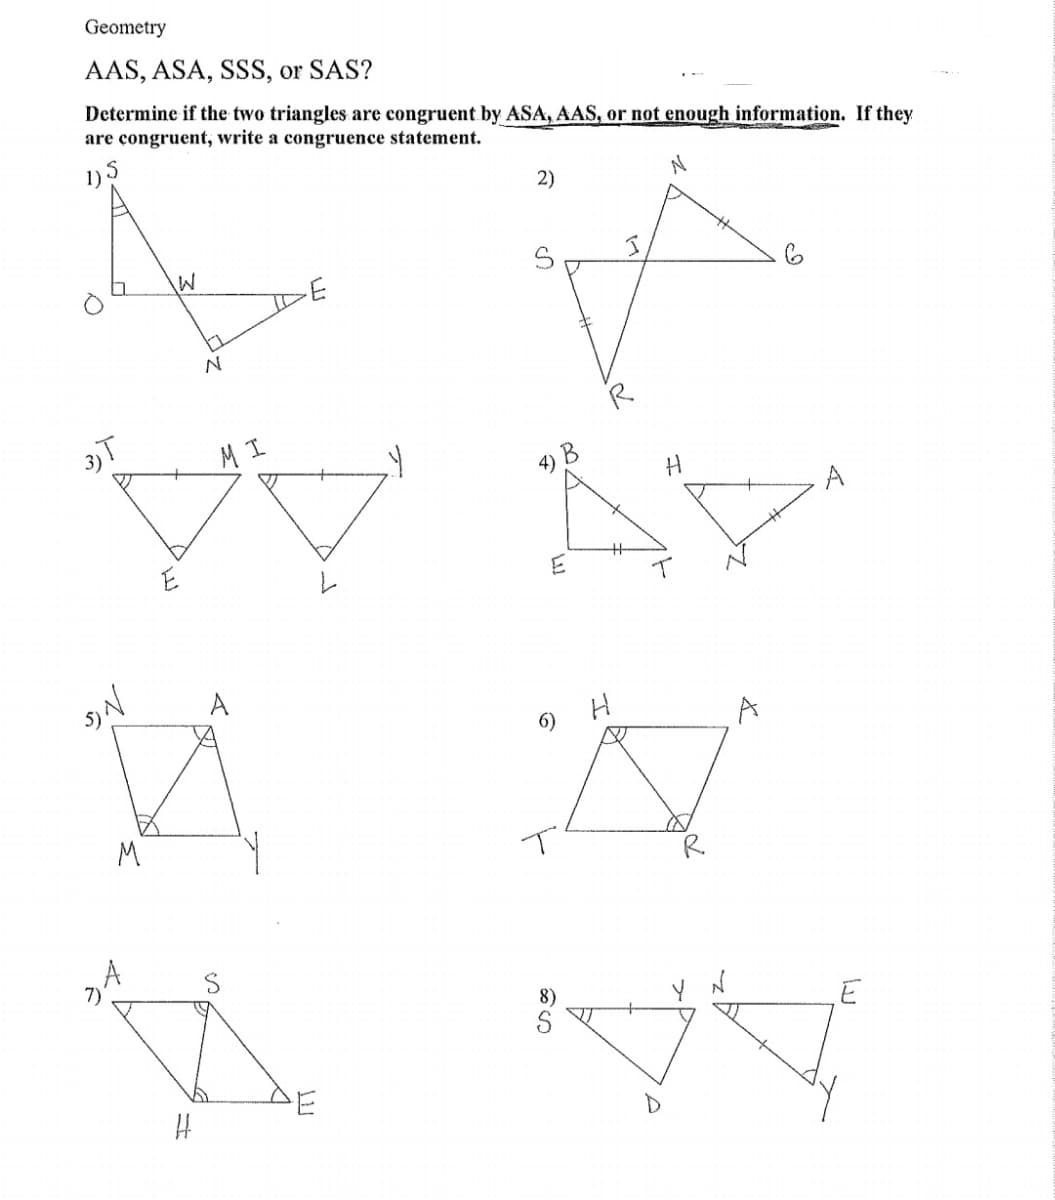 Geometry
AAS, ASA, SSS, or SAS?
Determine if the two triangles are congruent by ASA, AAS, or not enough information. If they
are congruent, write a congruence statement.
1)5
2)
3)T
MI
A
6)
M
R
8)
